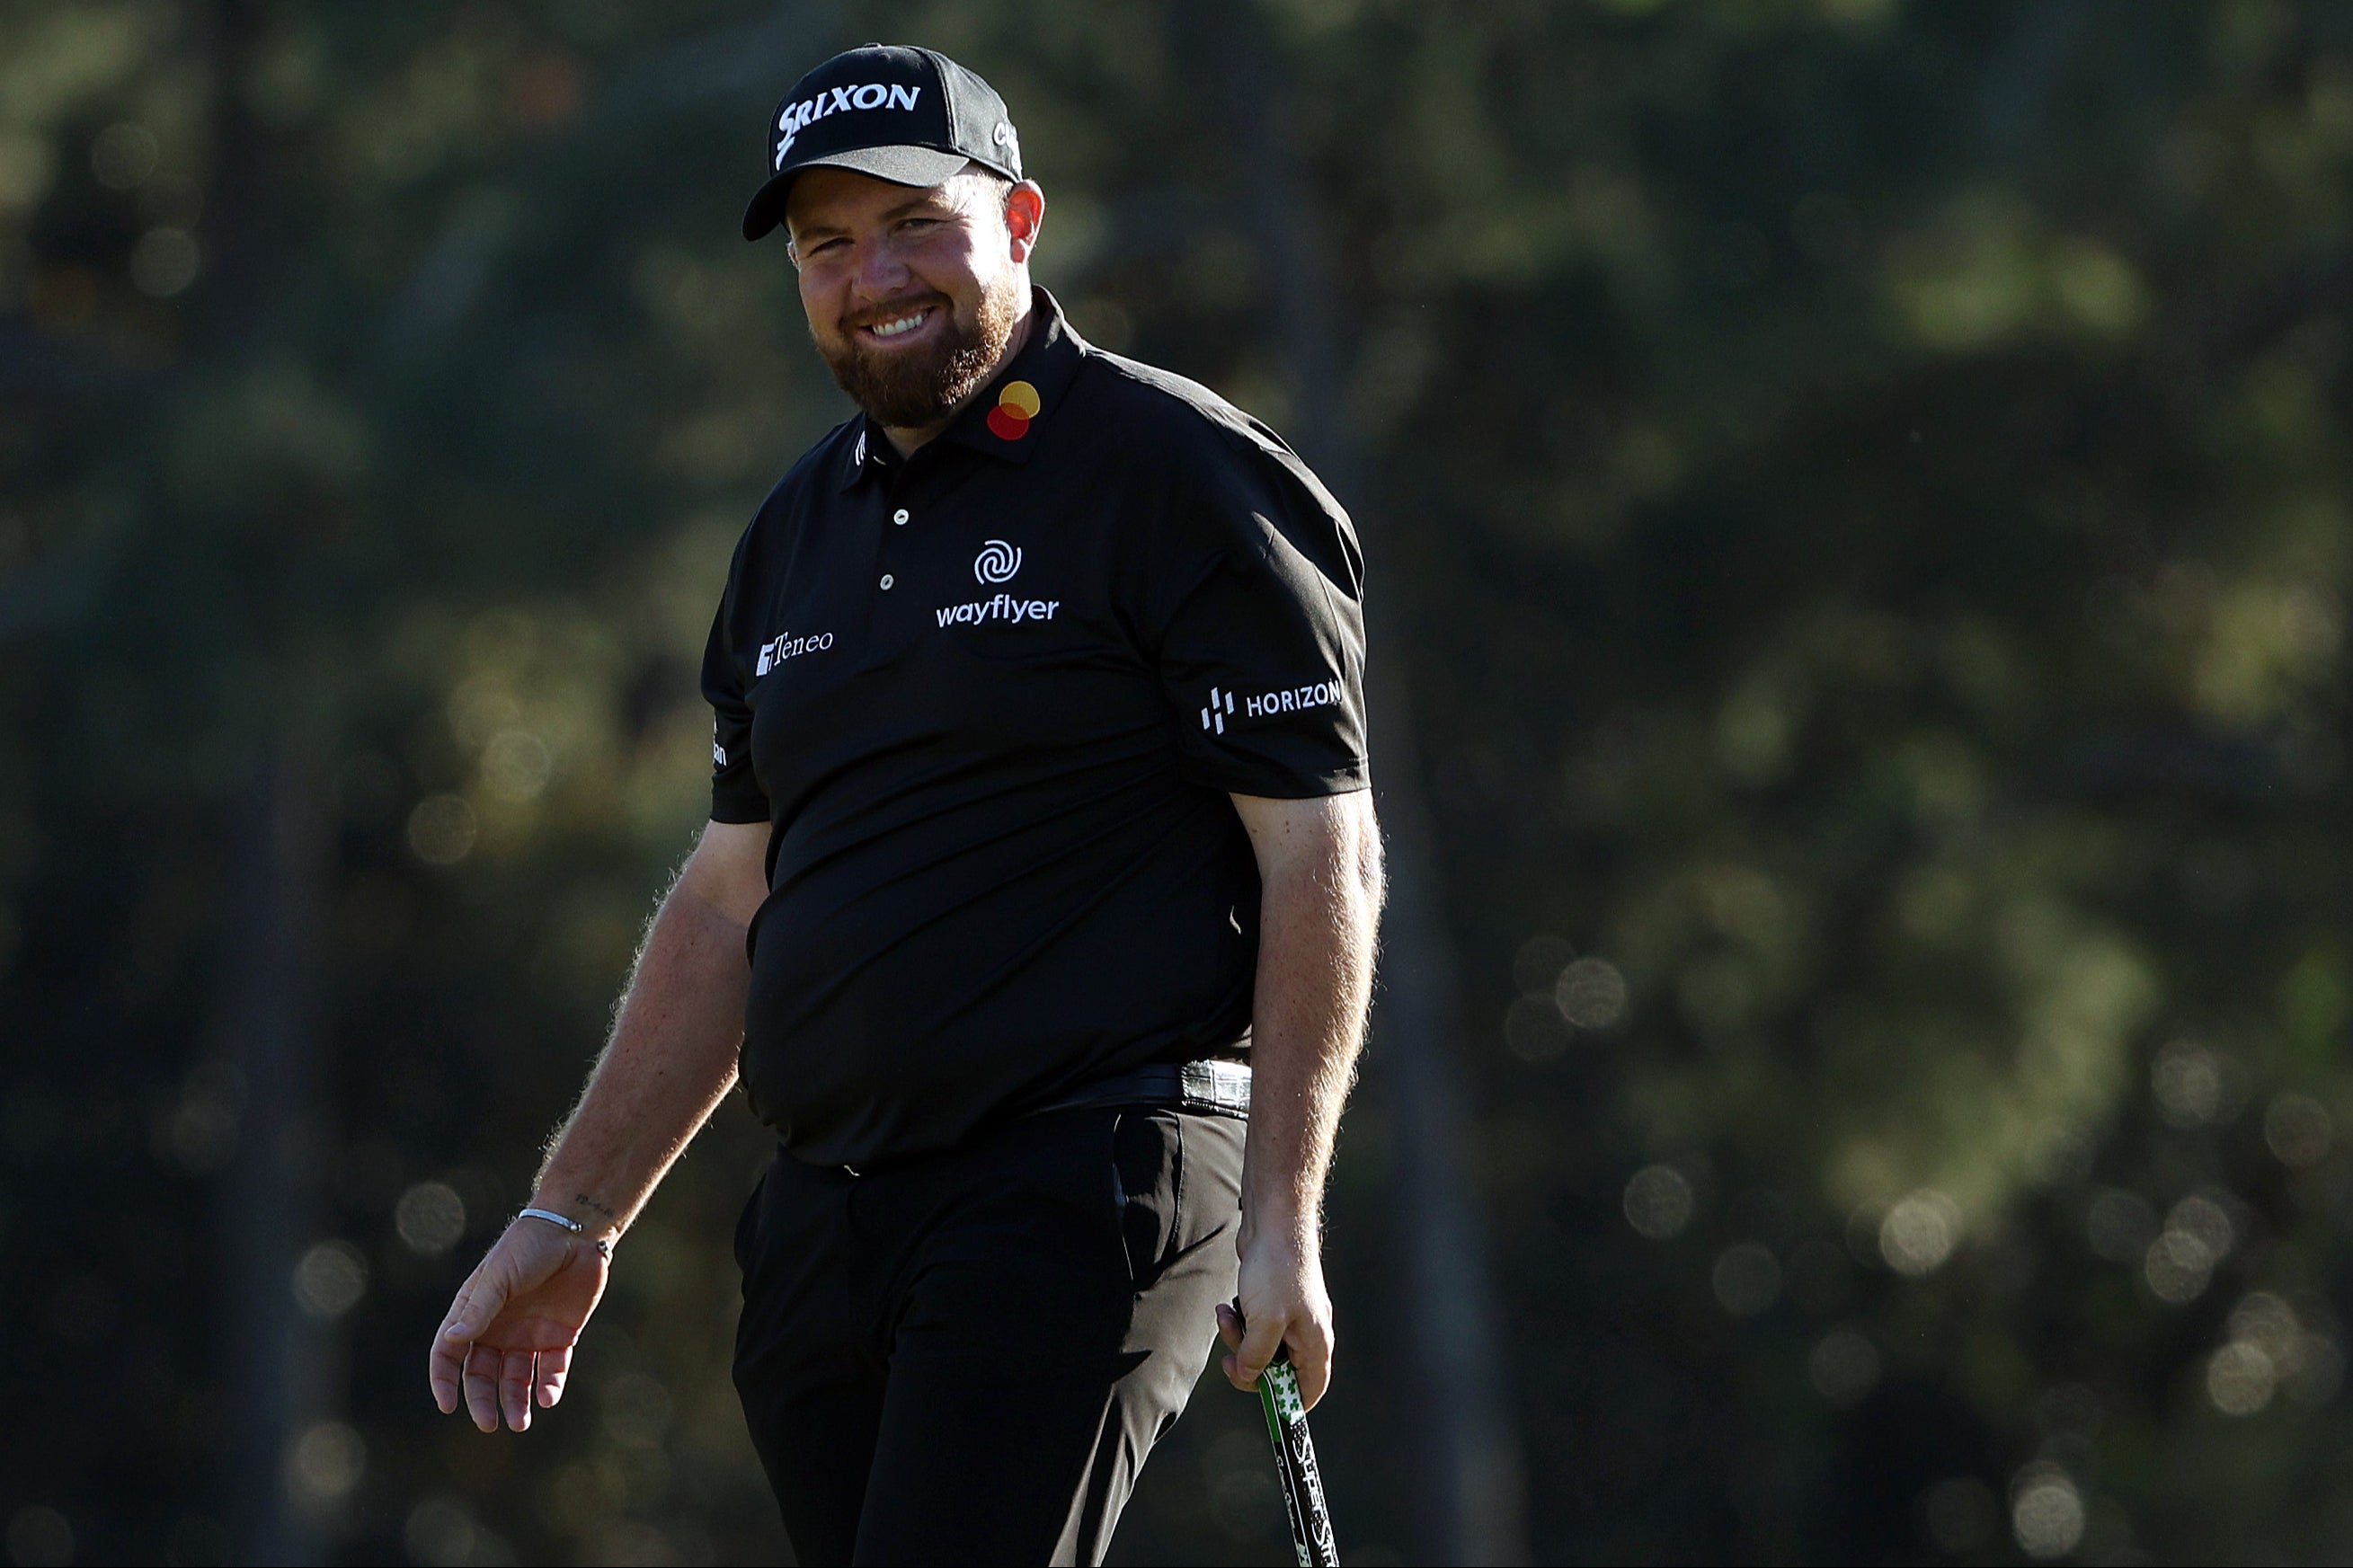 Shane Lowry is hoping for another good showing at Augusta National